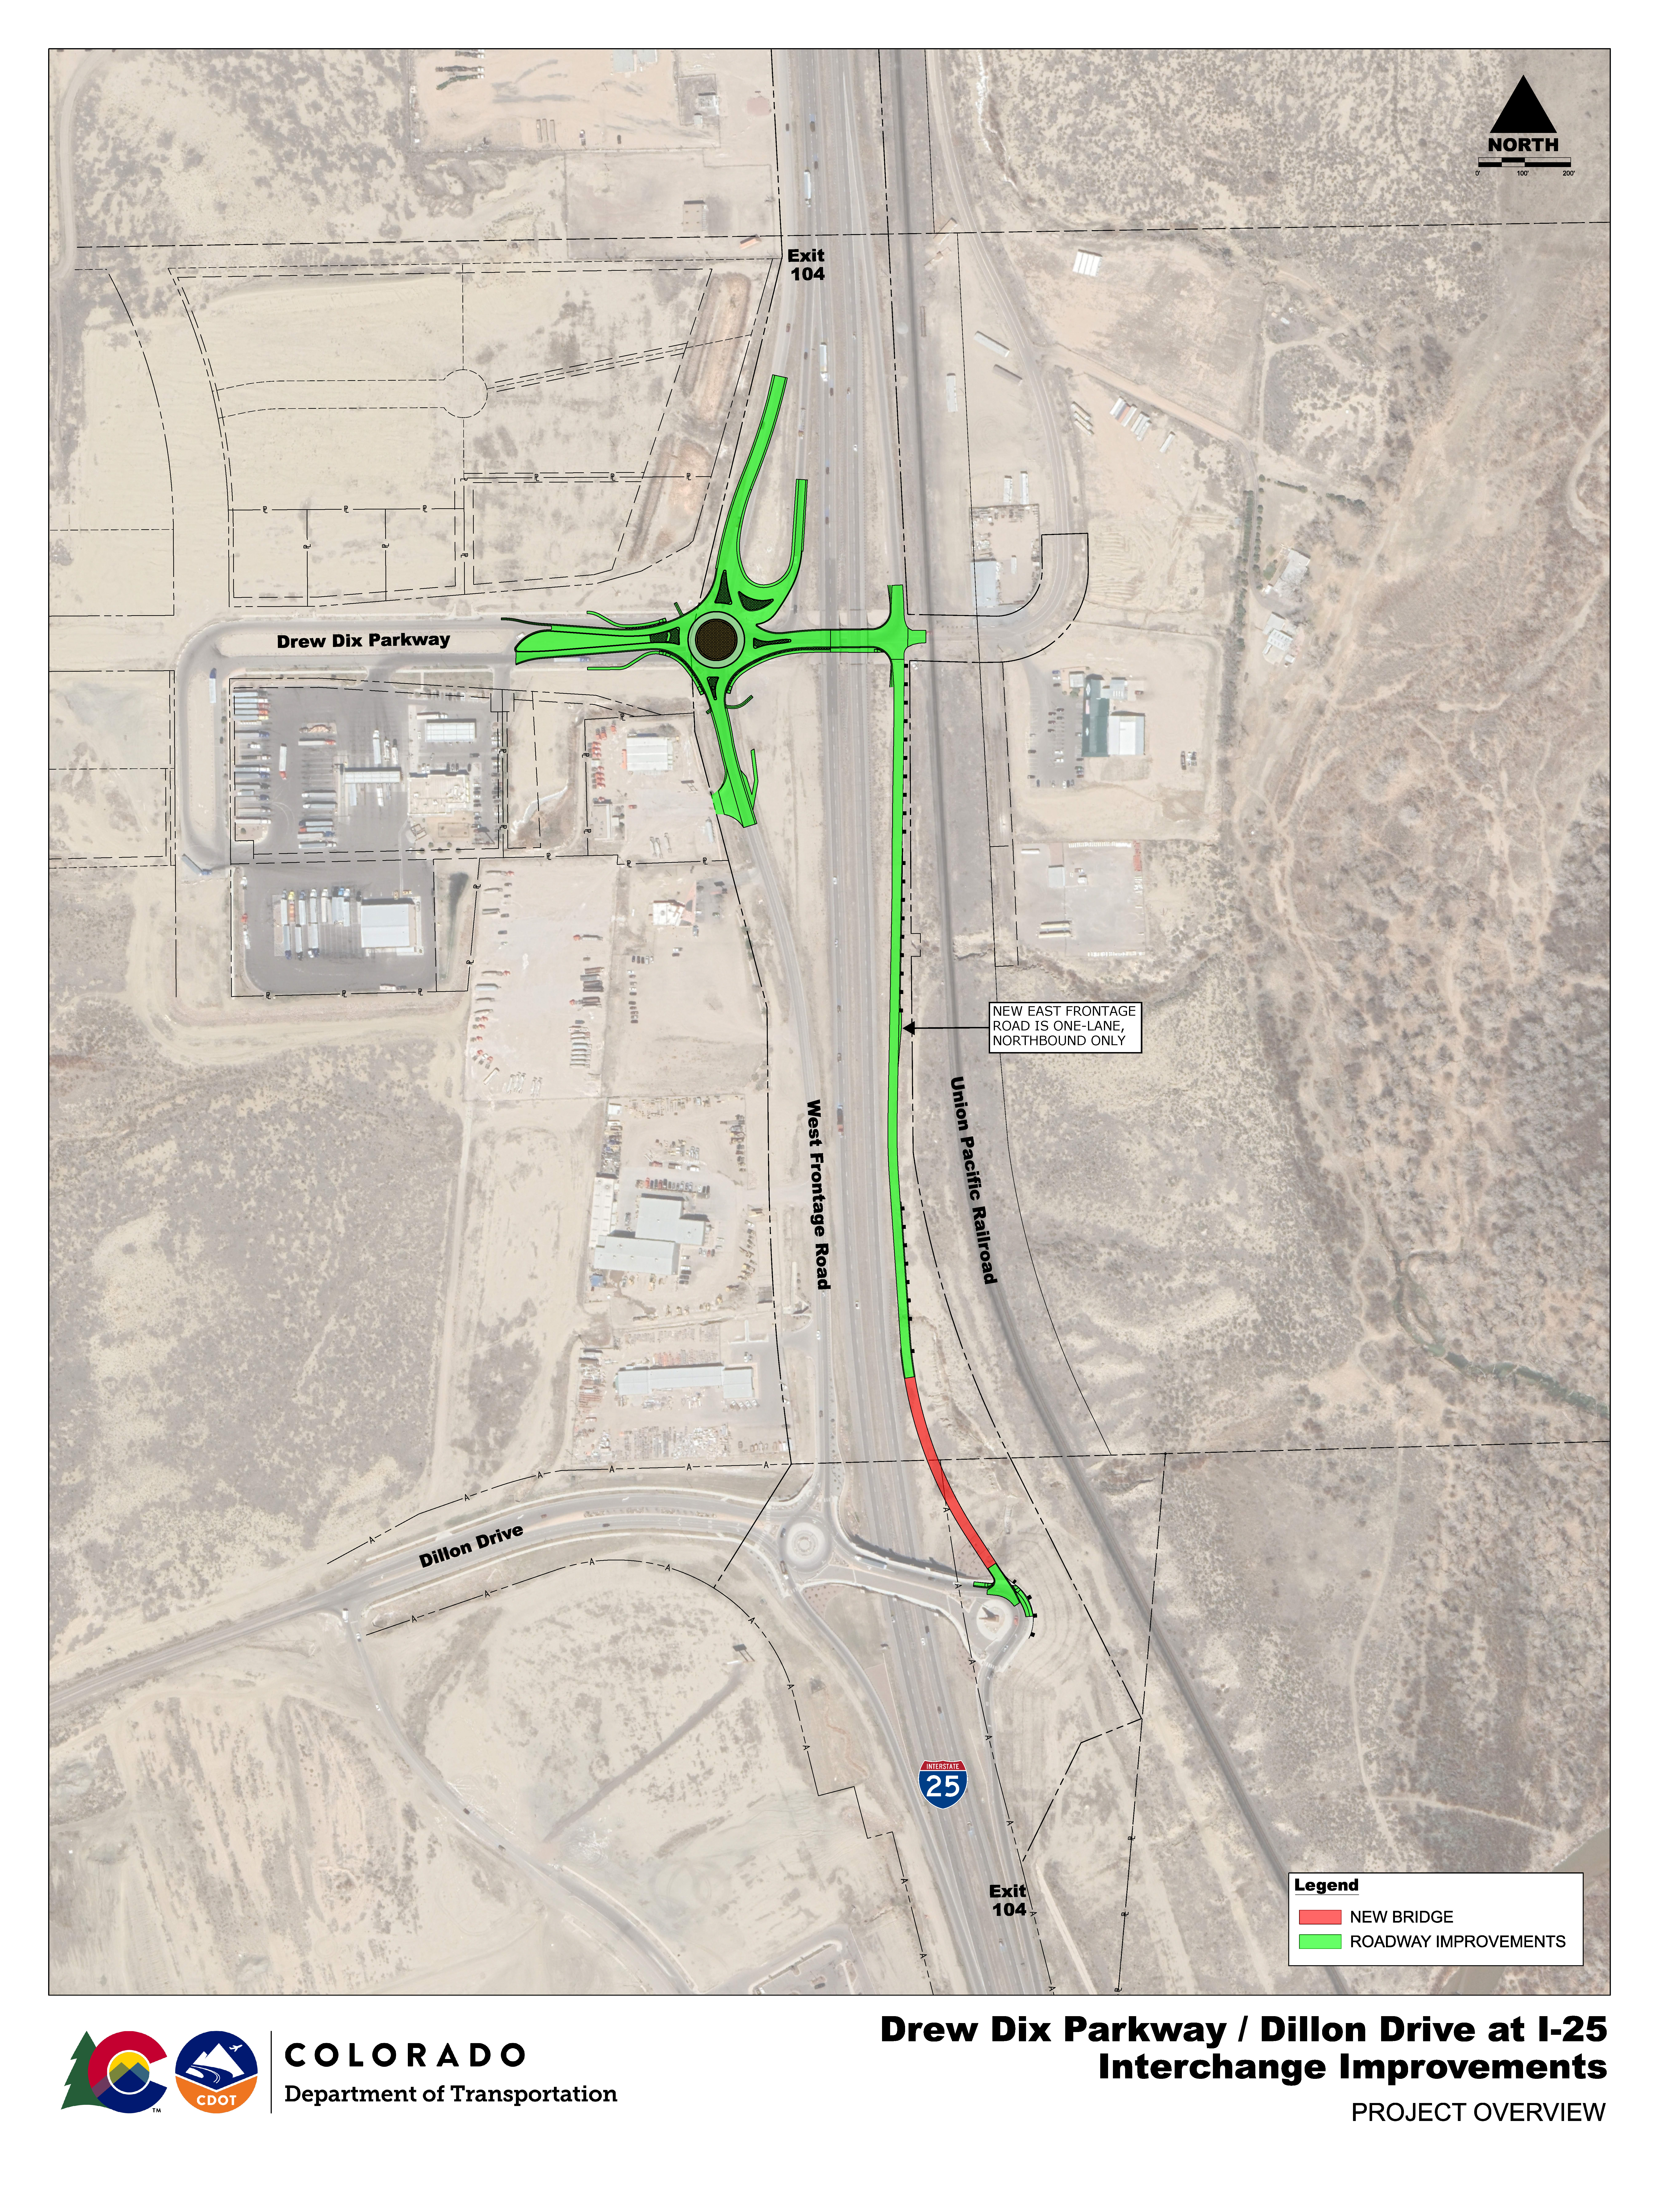 Drew Dix Dillon i25 Project Overview Map.jpg detail image